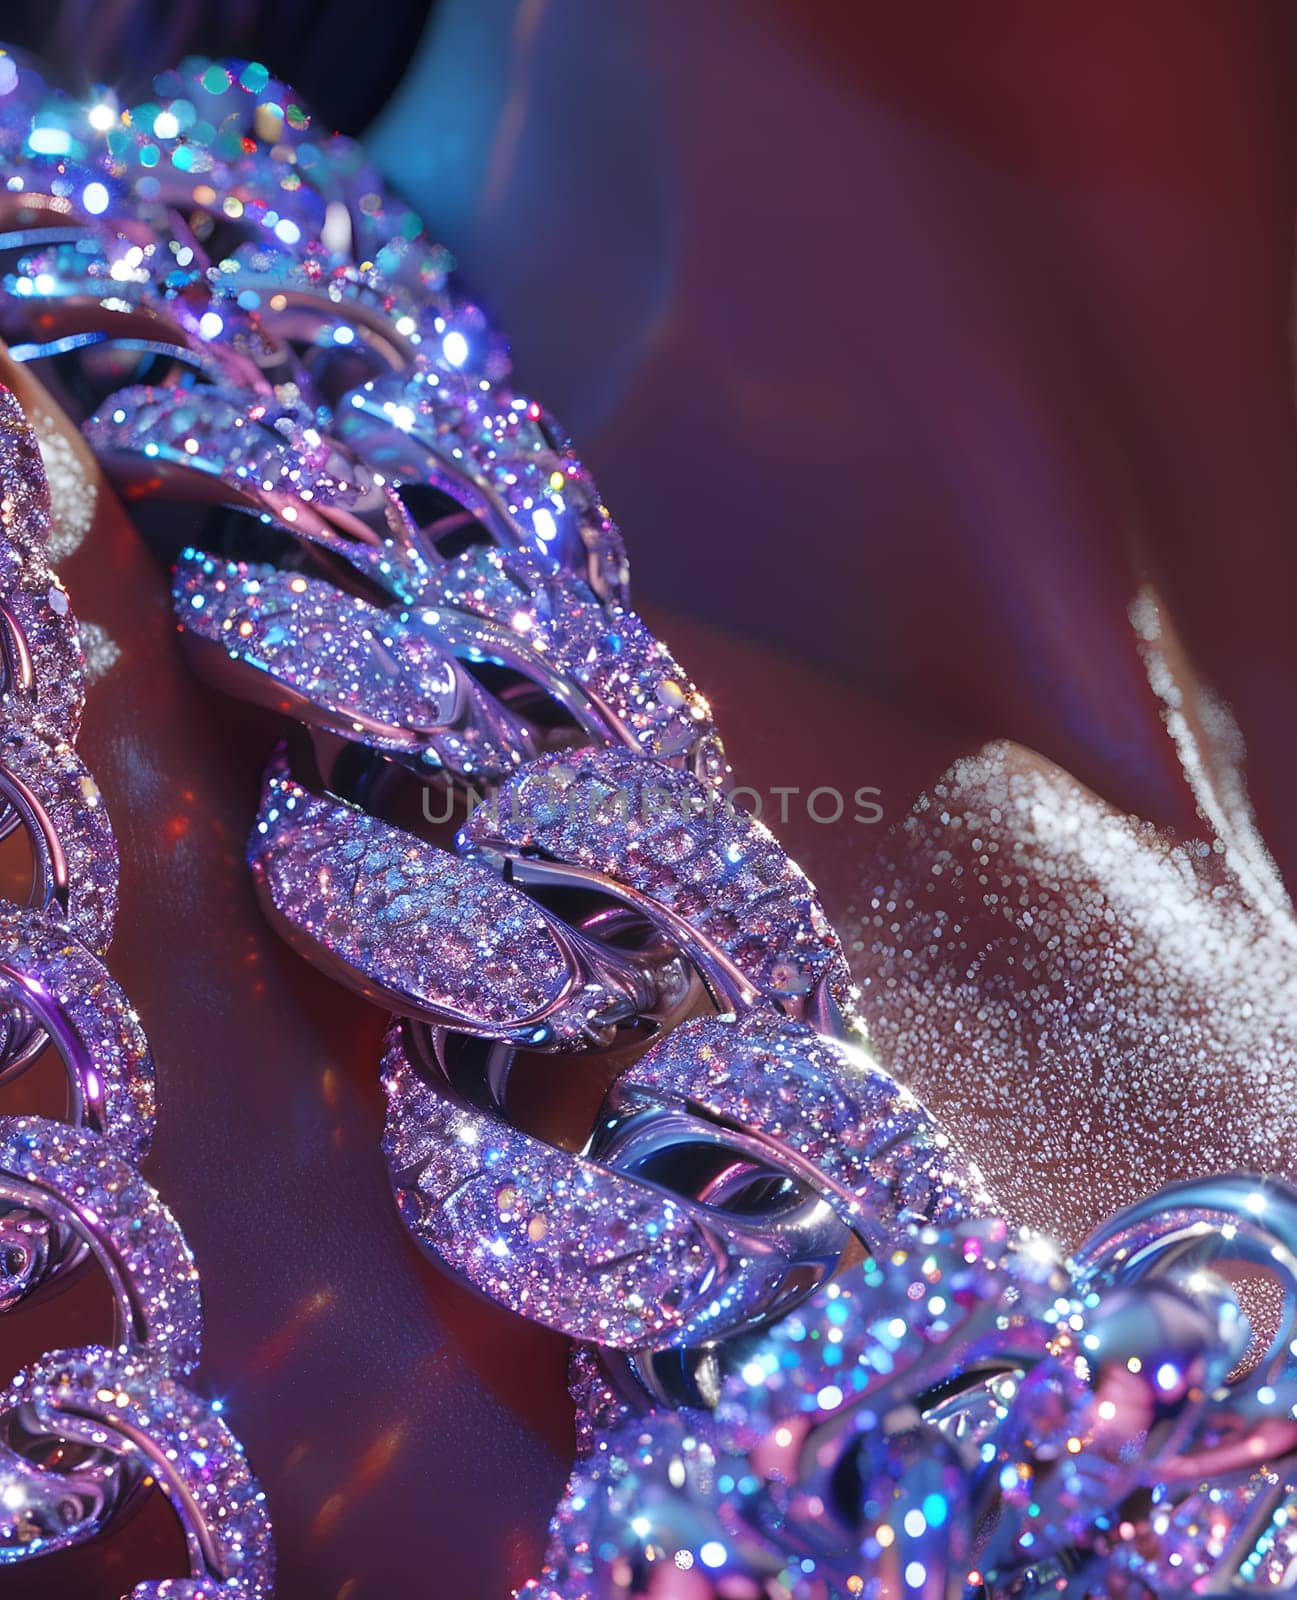 a close up of a purple chain with diamonds on it by Nadtochiy